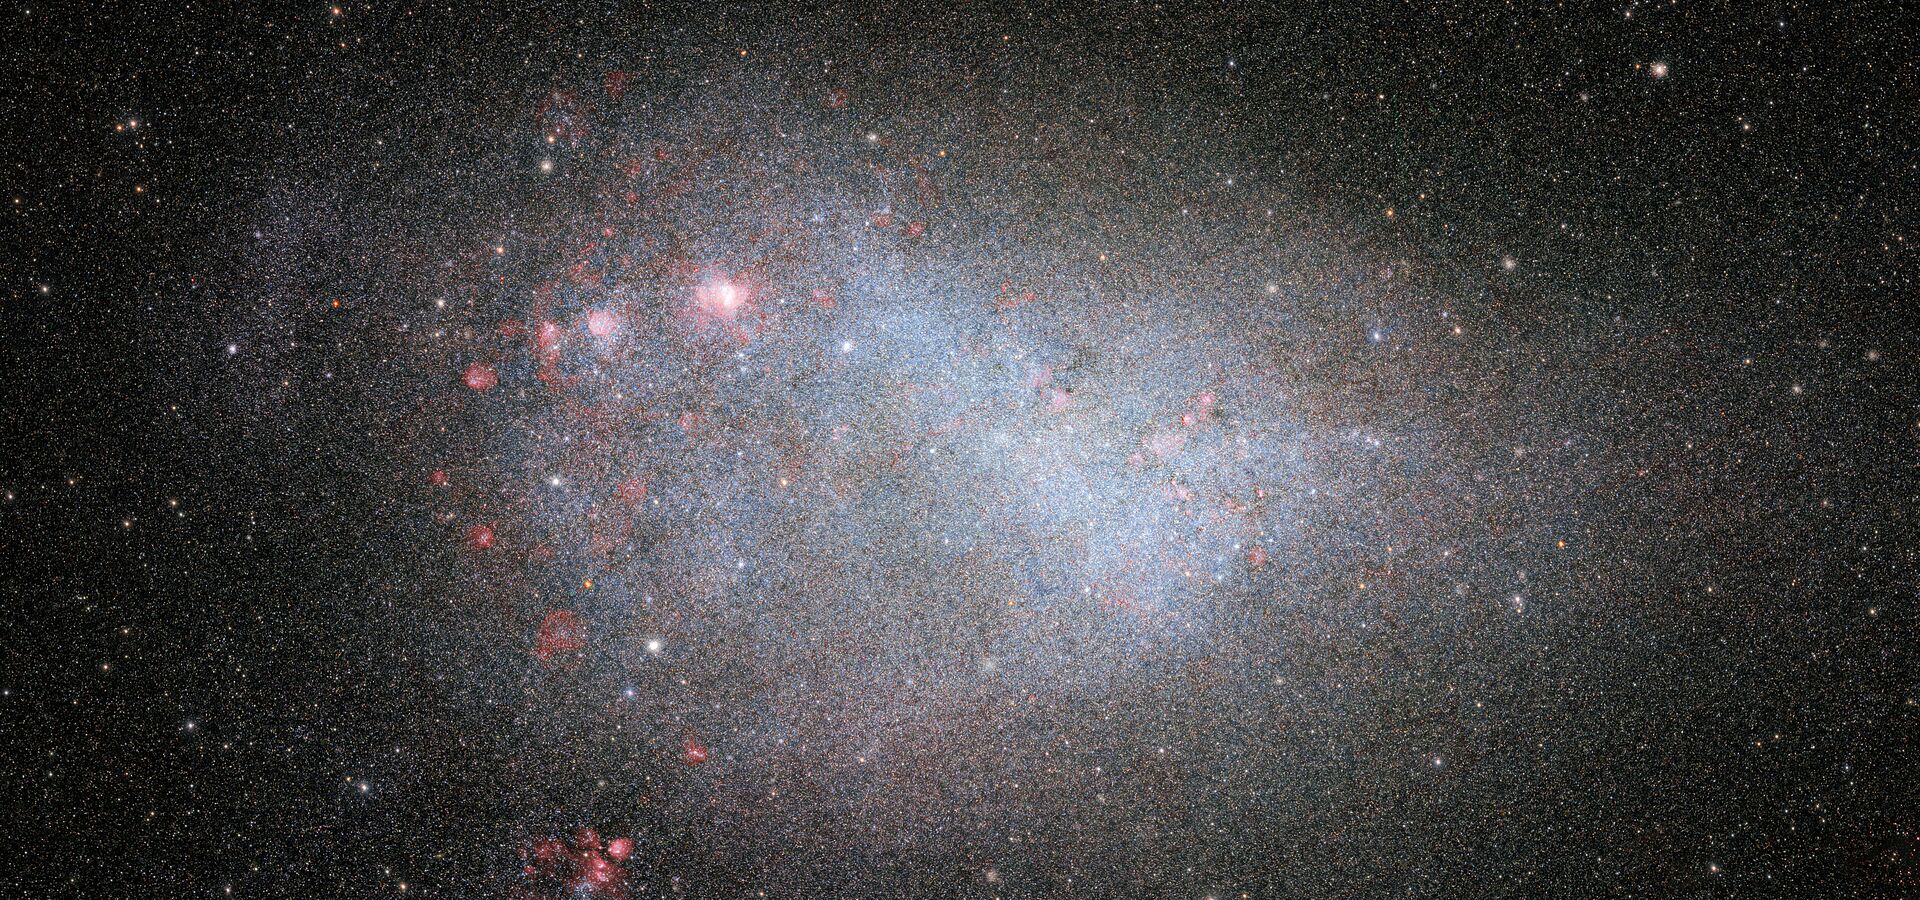 Deepest, widest view of the Small Magellanic Cloud from SMASH